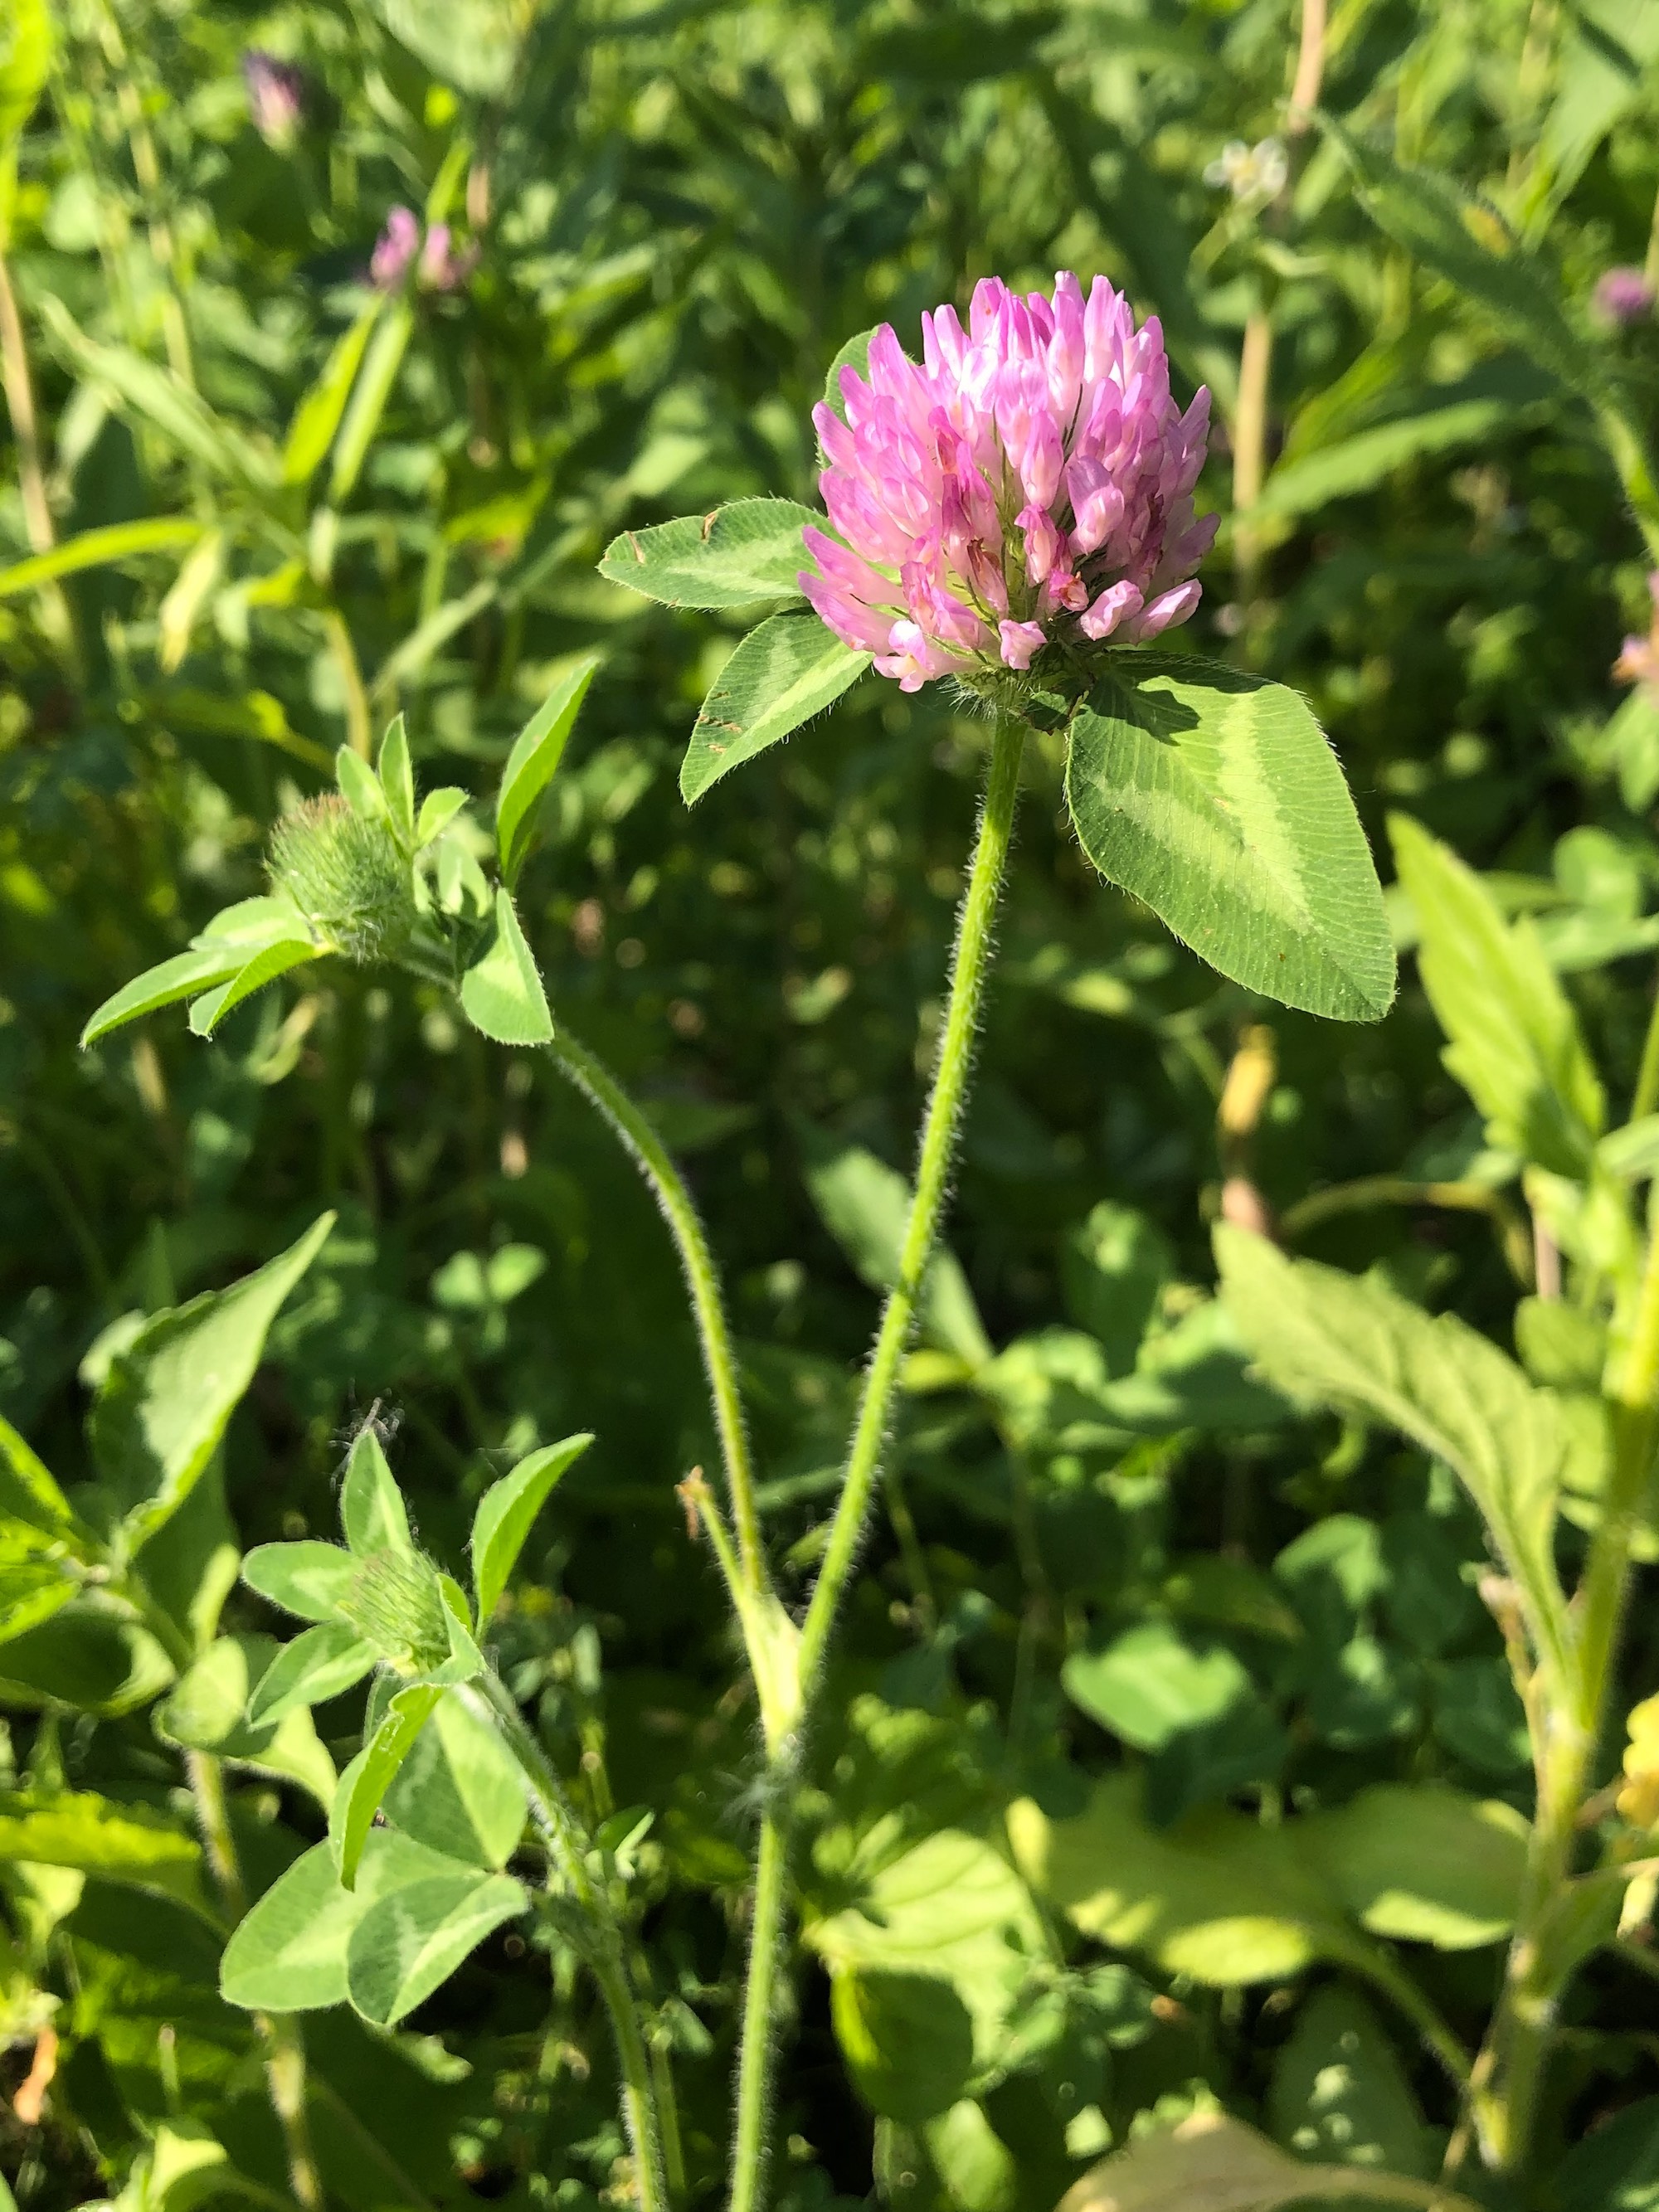 Red Clover in Marion Dunn Prairie in Madison, Wisconsin on June 12, 2021.